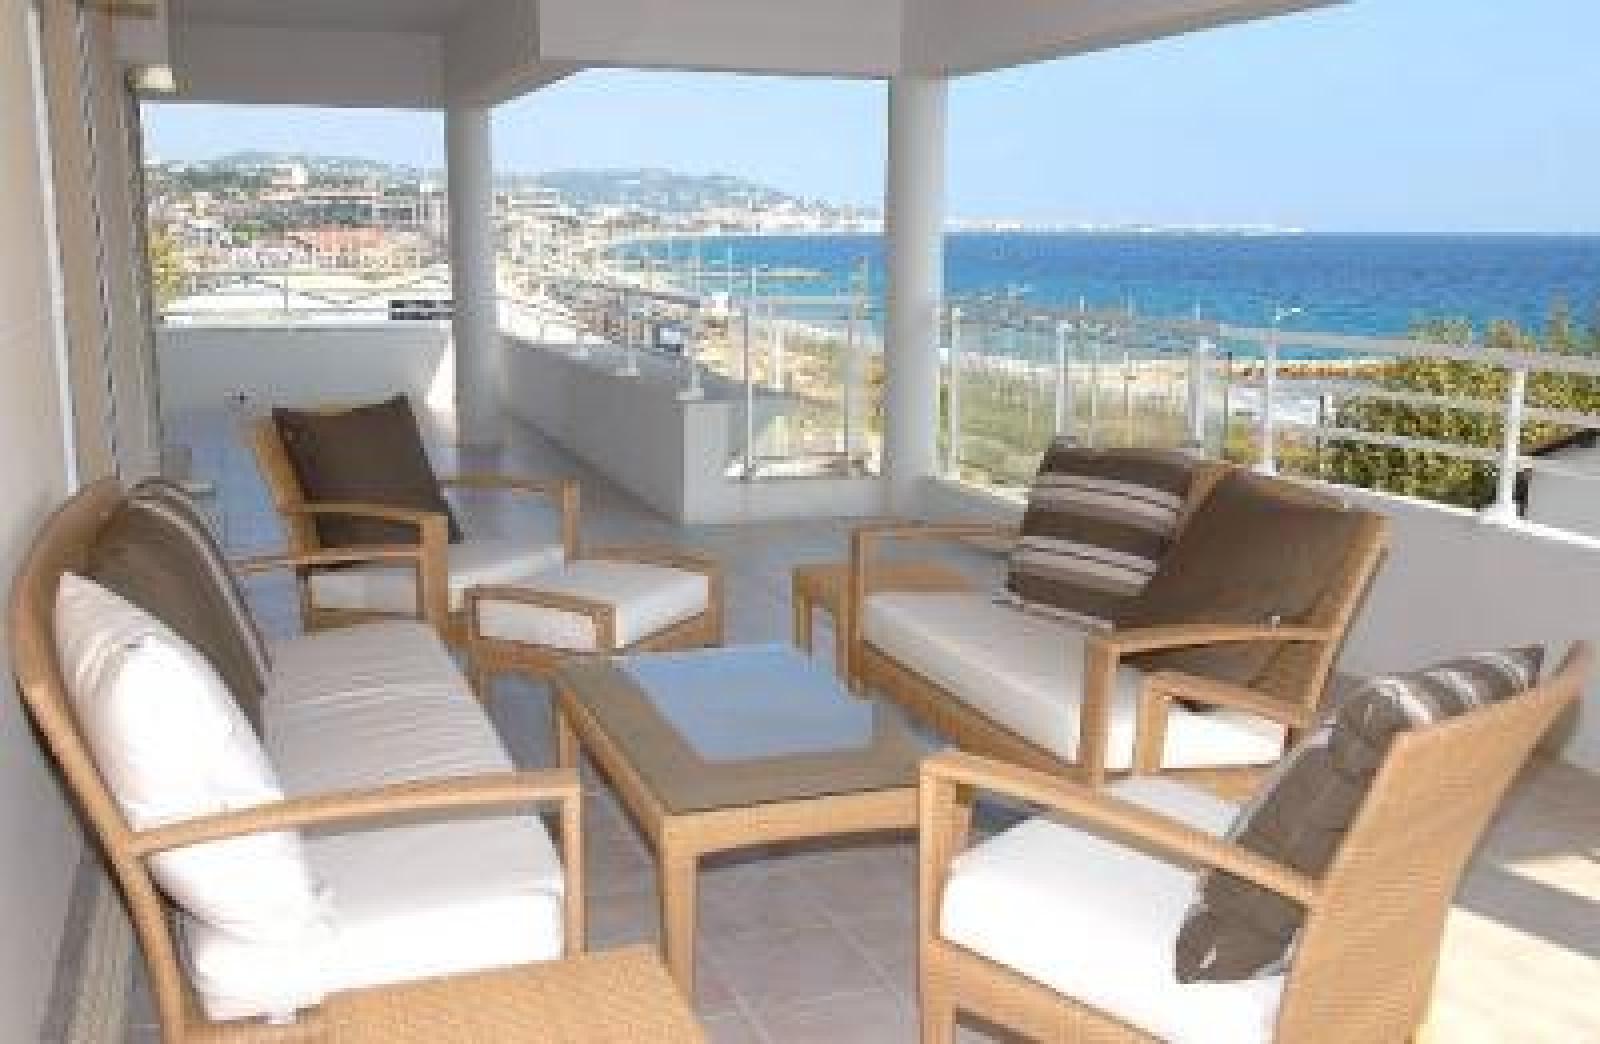 Stunning three bedroom apartment on seafront in Cannes with panoramic sea views 399 - 399